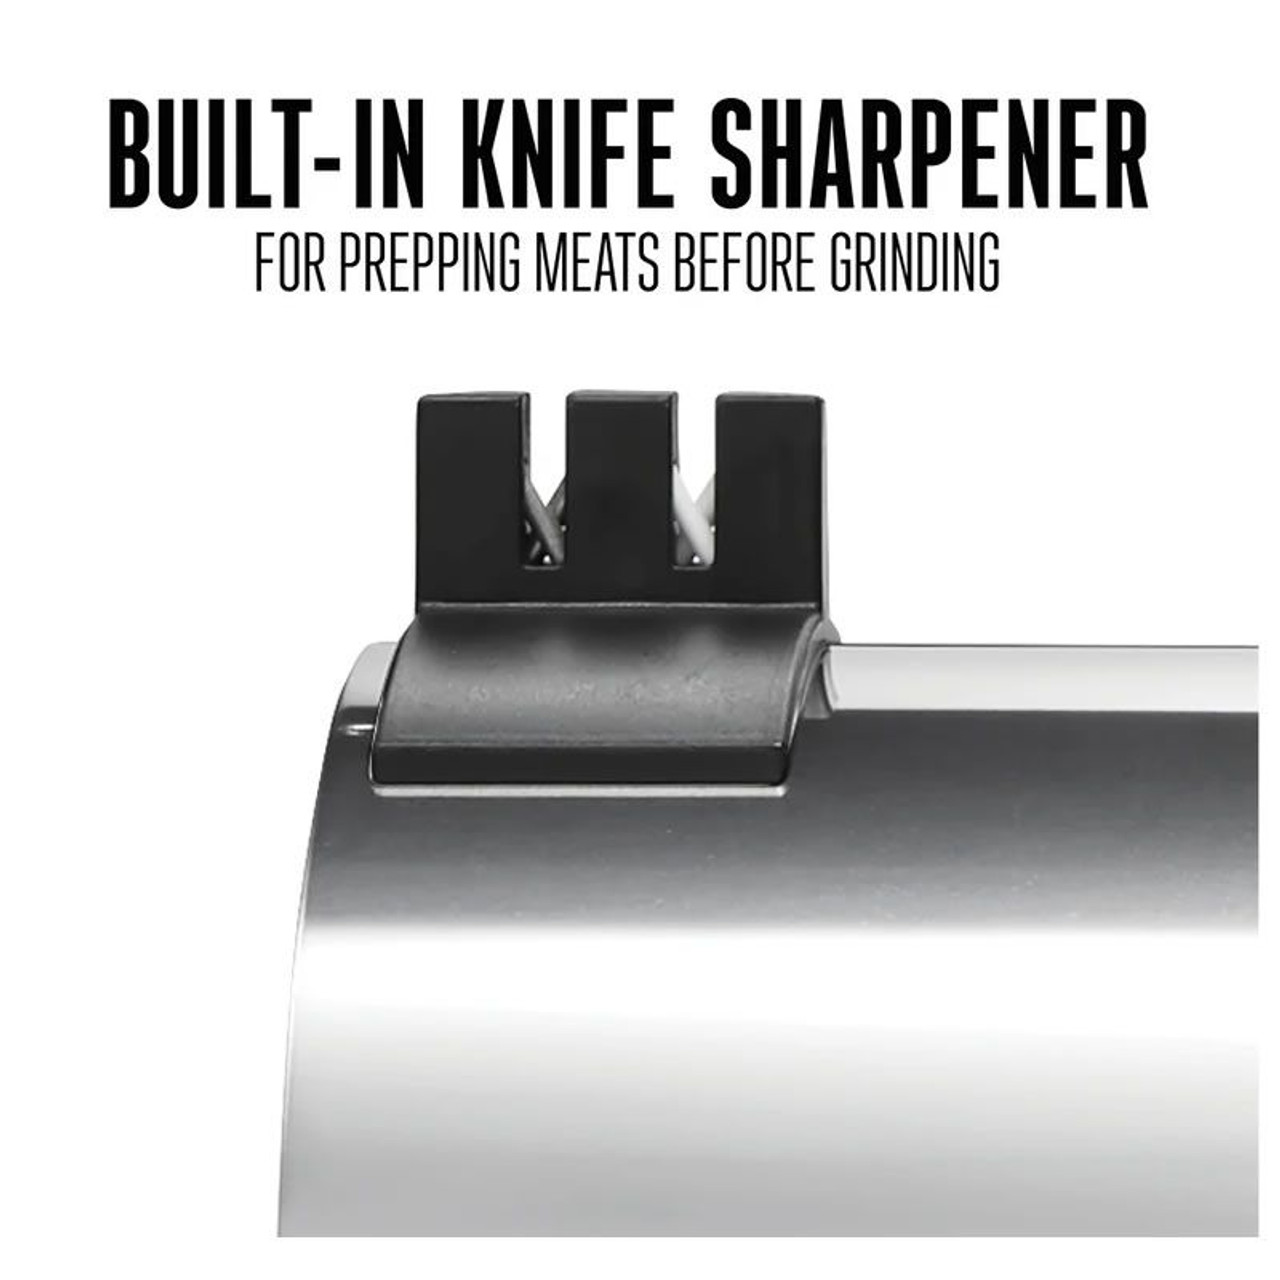 https://cdn11.bigcommerce.com/s-3n1nnt5qyw/images/stencil/1280x1280/products/31210/34394/weston-new-pro-series-22-stainless-steel-meat-grinder-sausage-stuffer-1-5-hp-model-10-2201-w-83__38909.1686836265.jpg?c=1?imbypass=on